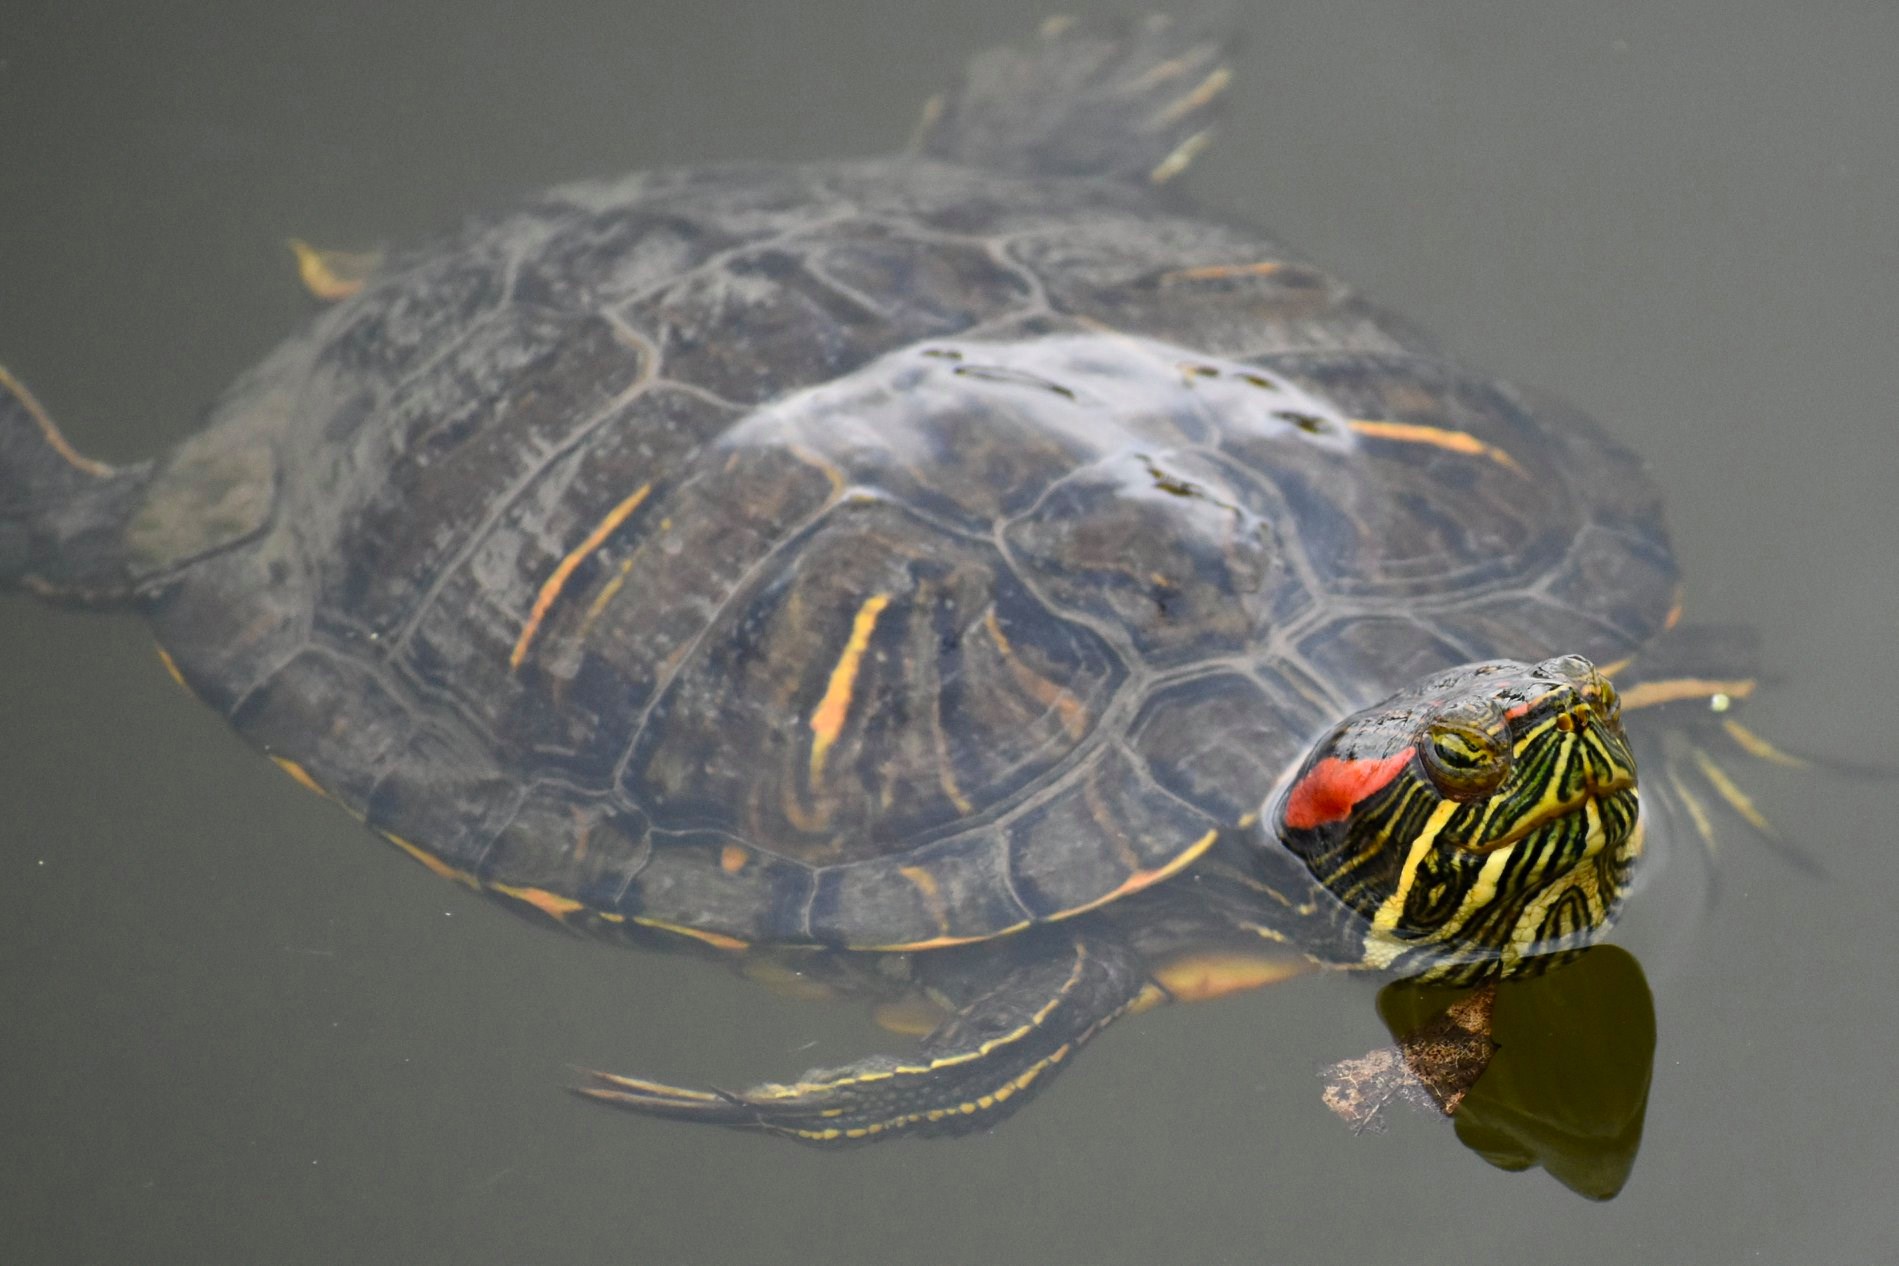 A red-eared slider poking out of the water.